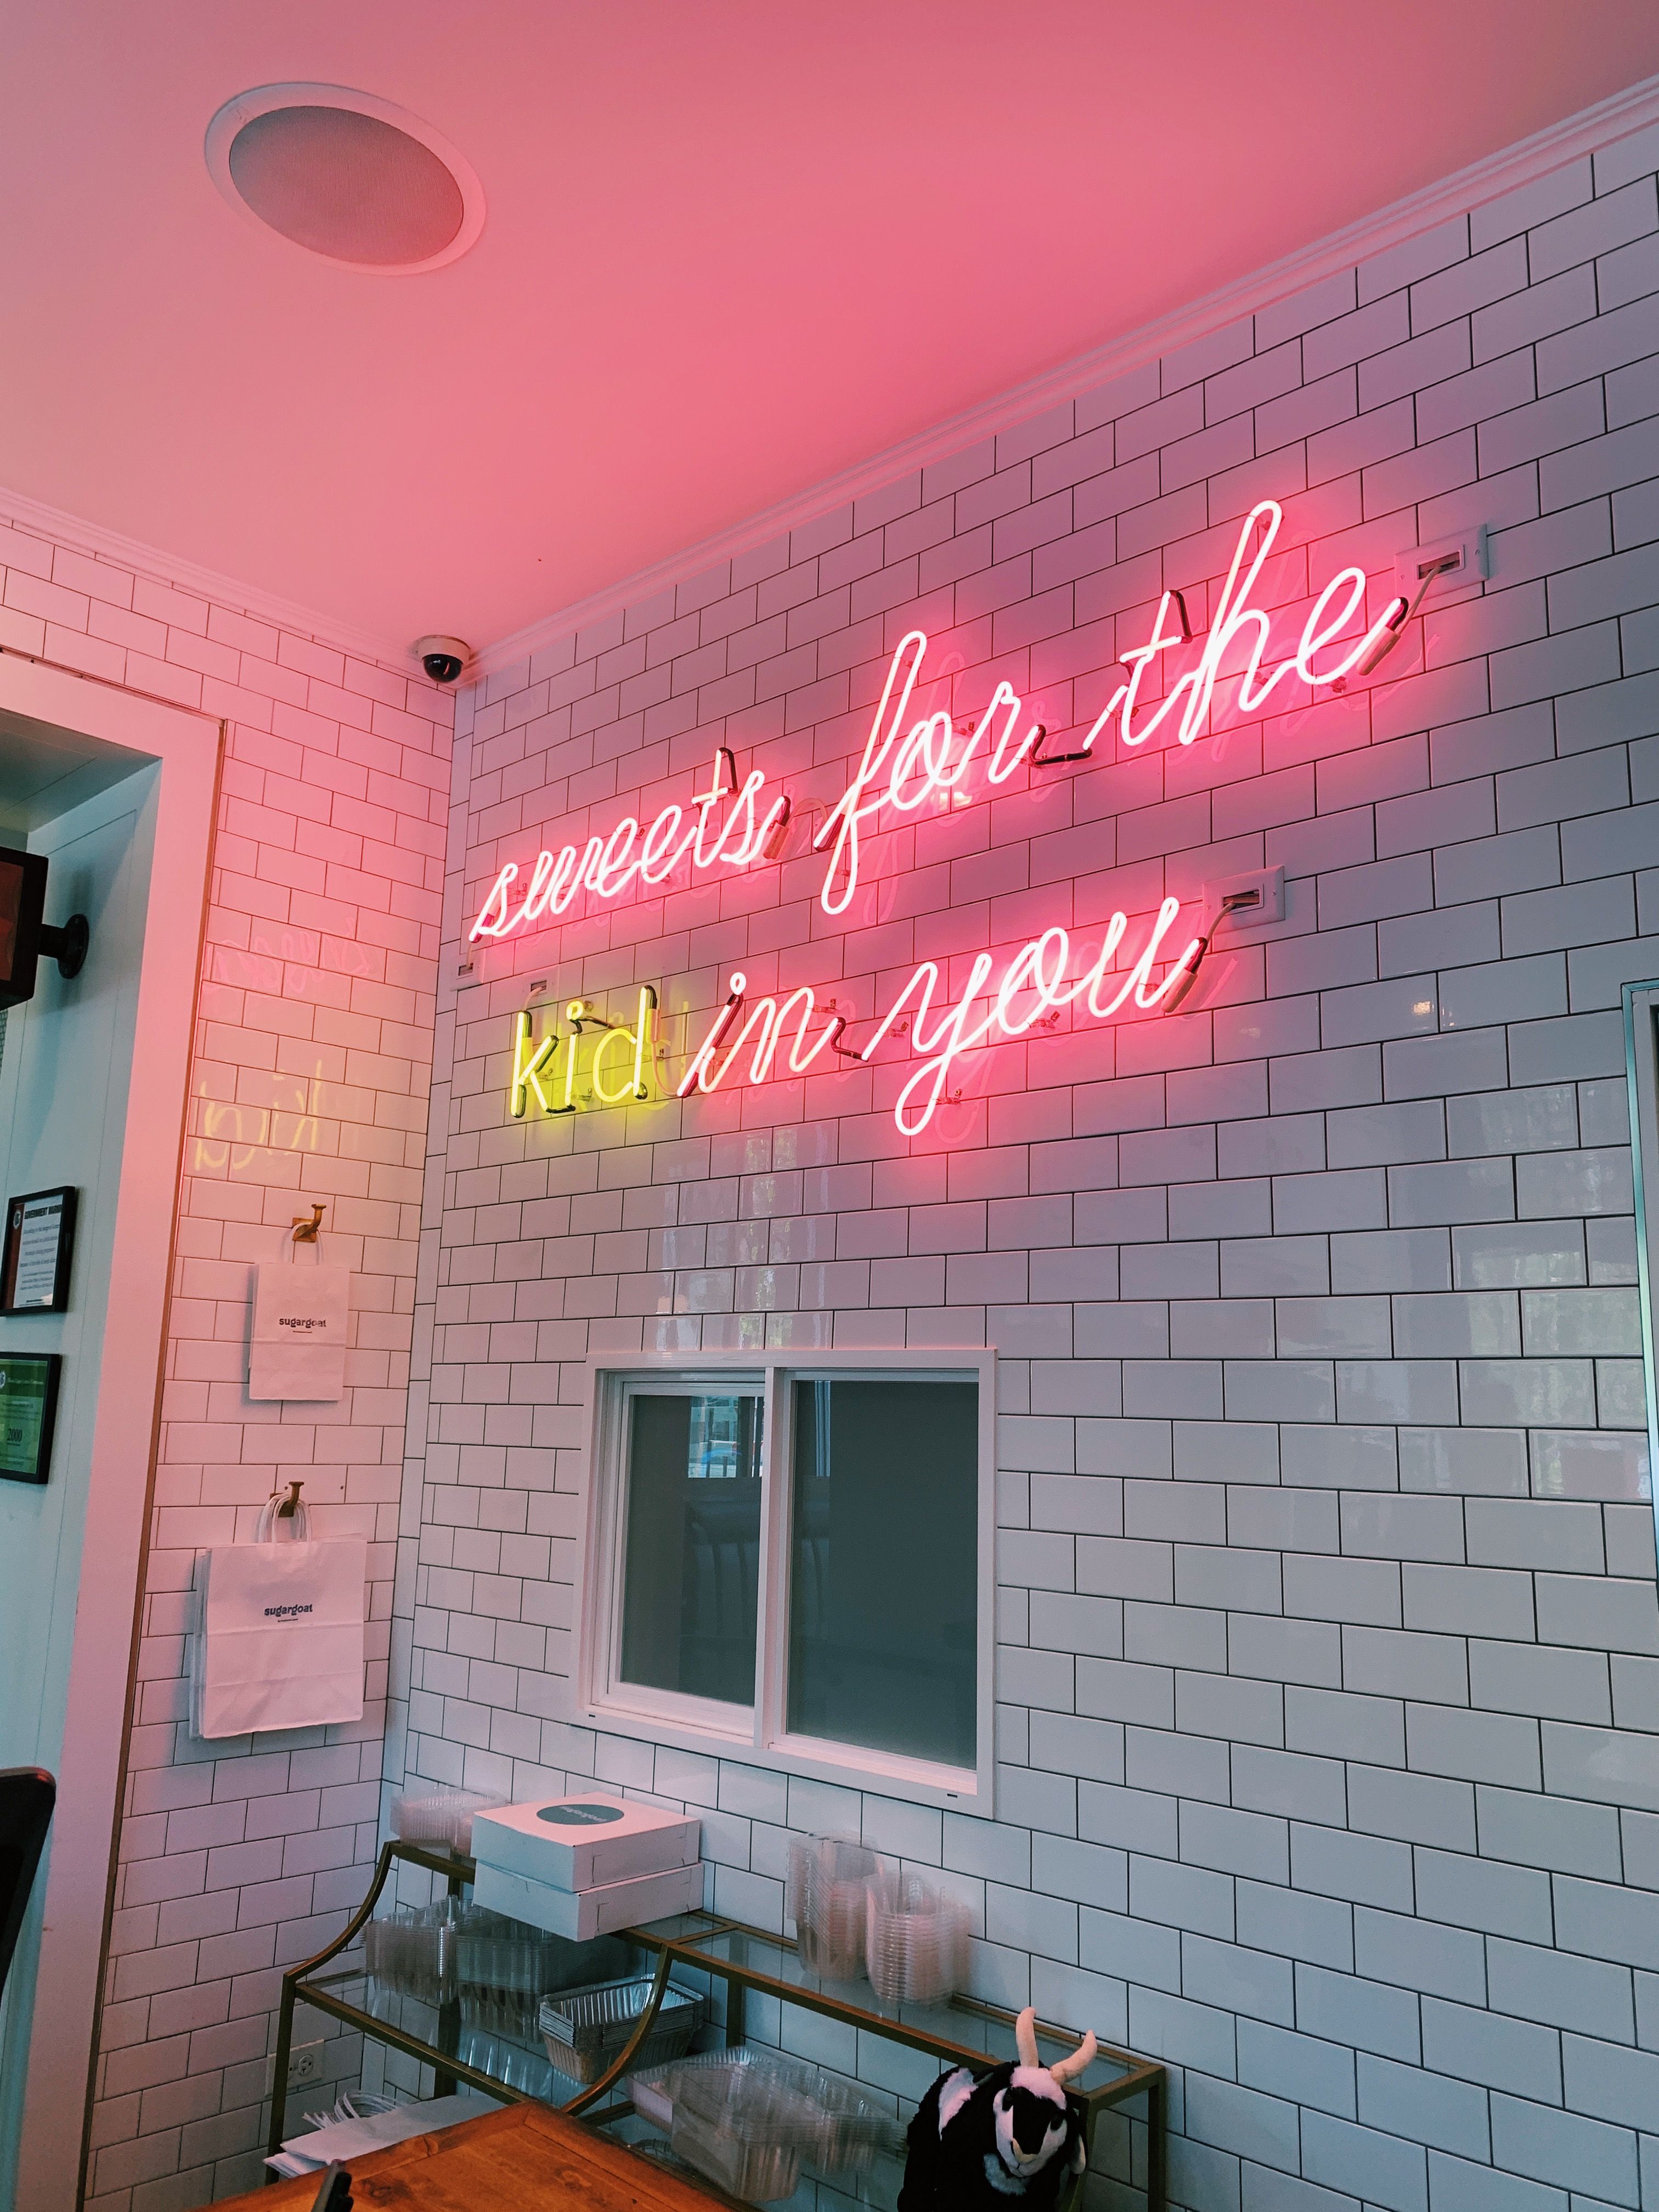 A neon sign that says "Sweets for the kid in you" in pink and yellow